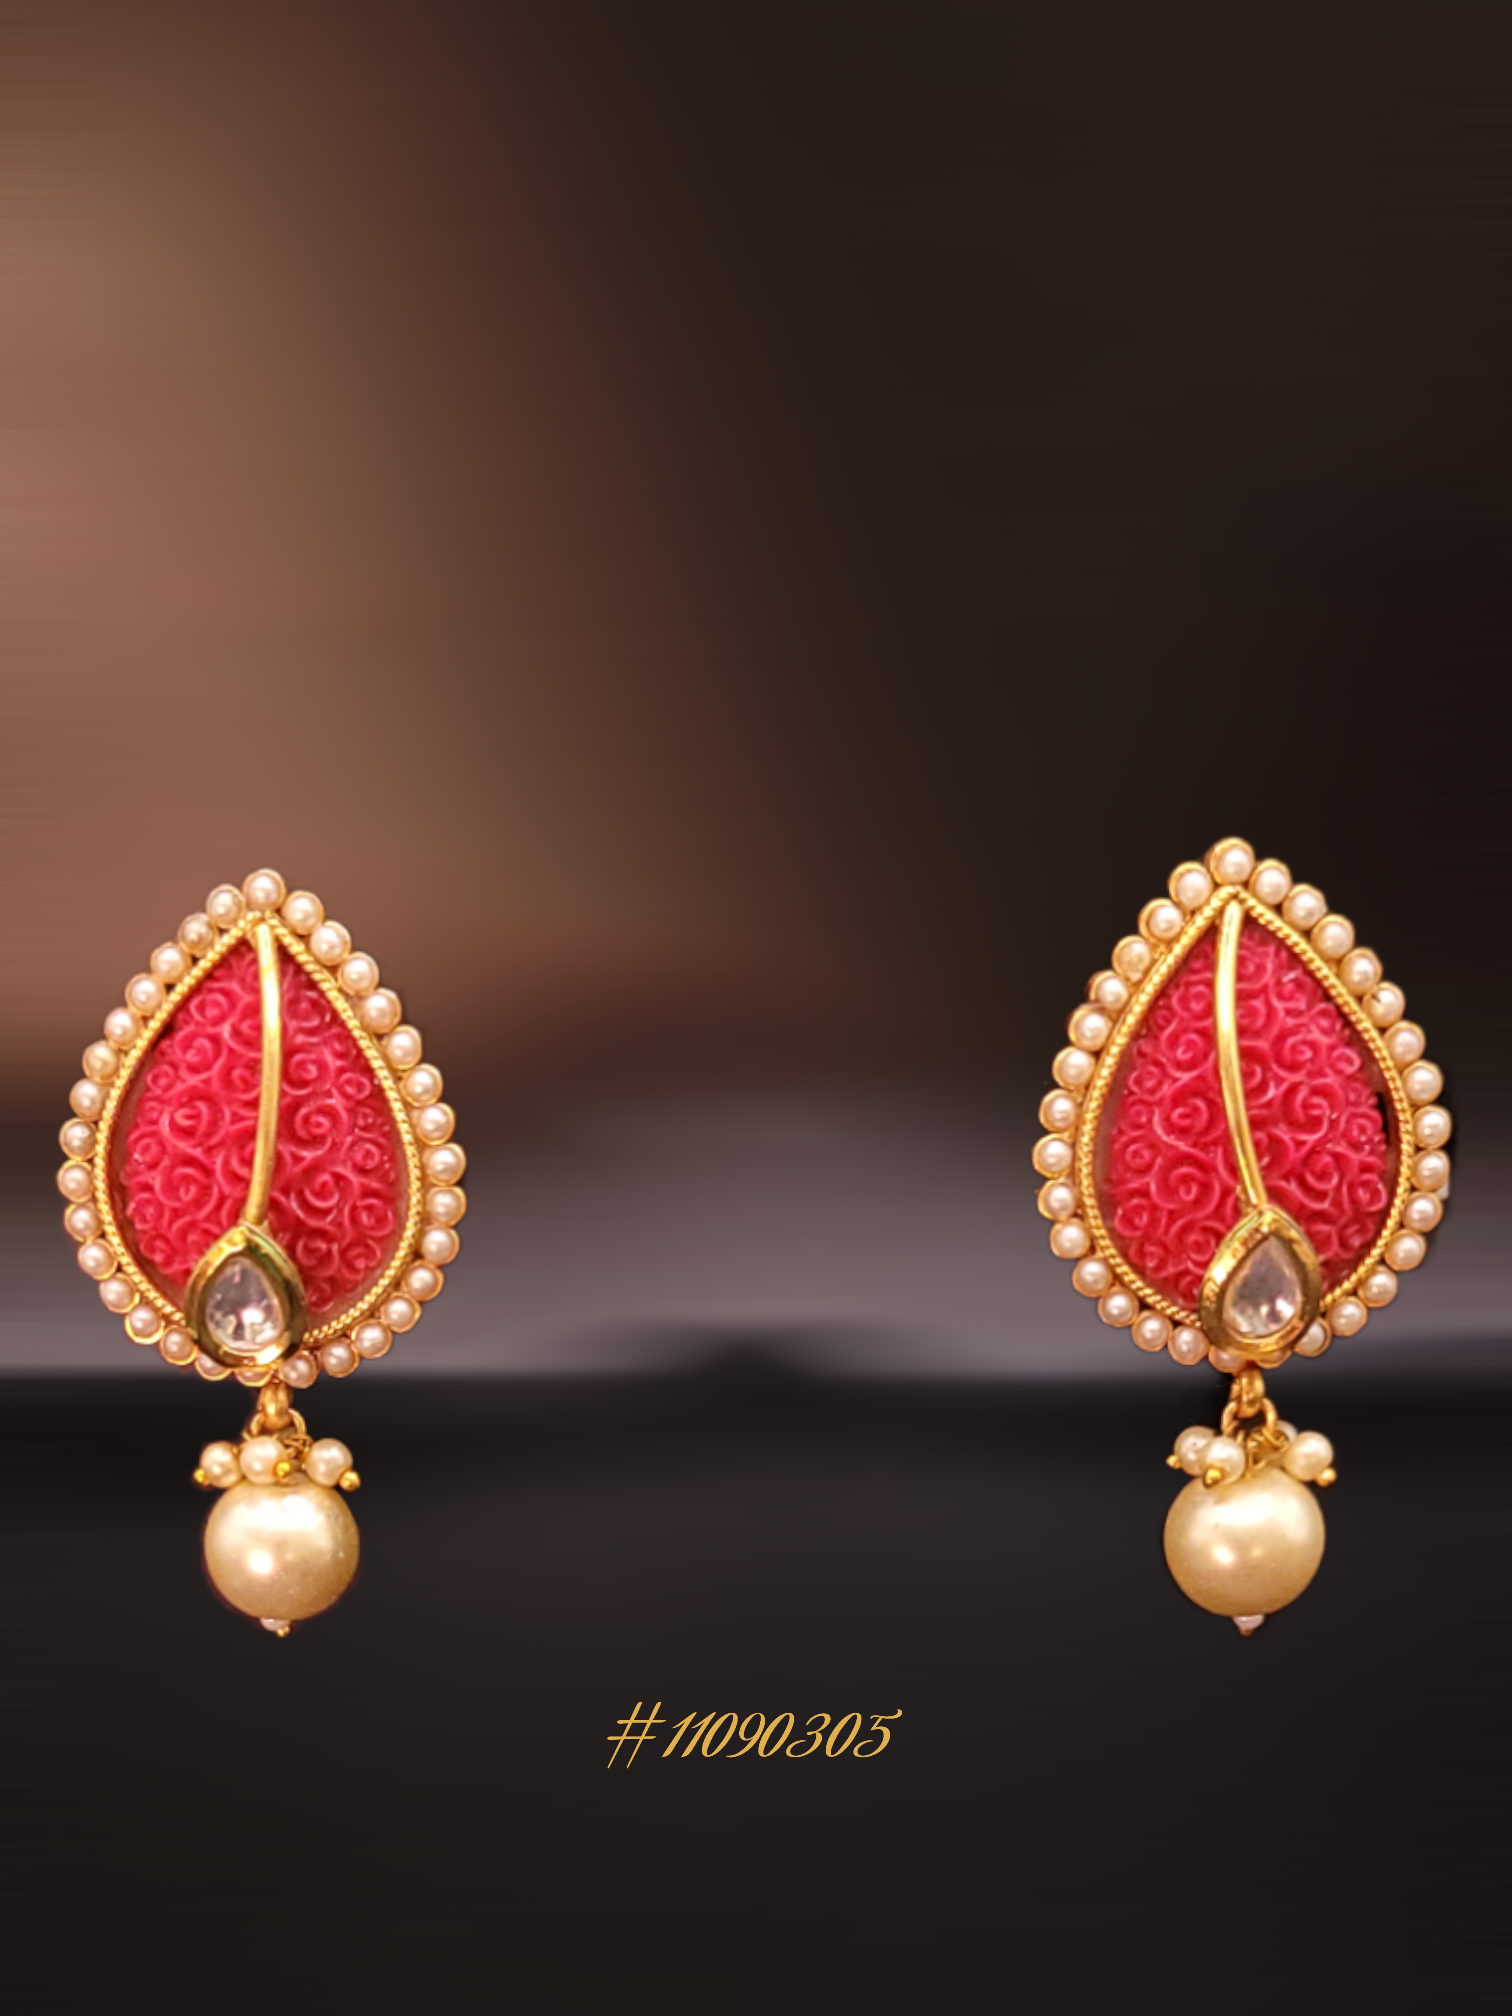 BEAUTIFUL CASUAL EARRINGS IN GOLD, PEARL AND RED COLOR